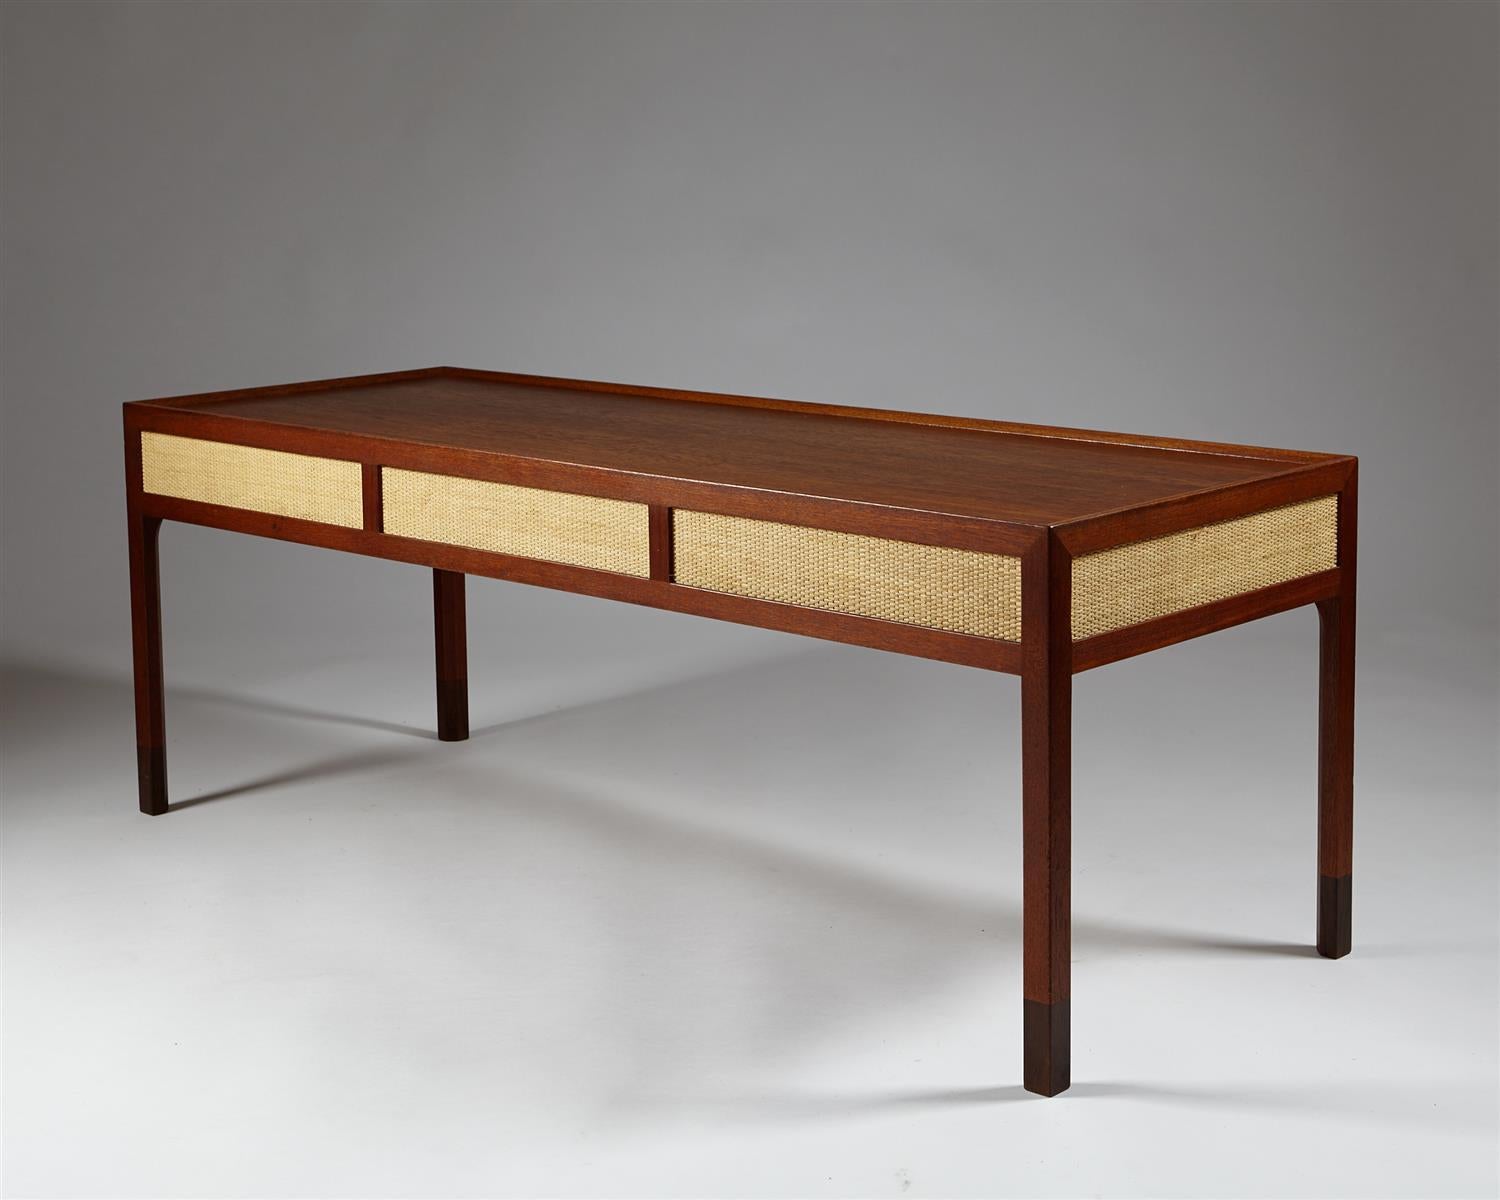 Occasional table designed by Mogens Lassen for T. Madsen,
Denmark. 1953.

Teak, rosewood and hessian.

Measurements: 
H: 55 cm / 1' 8